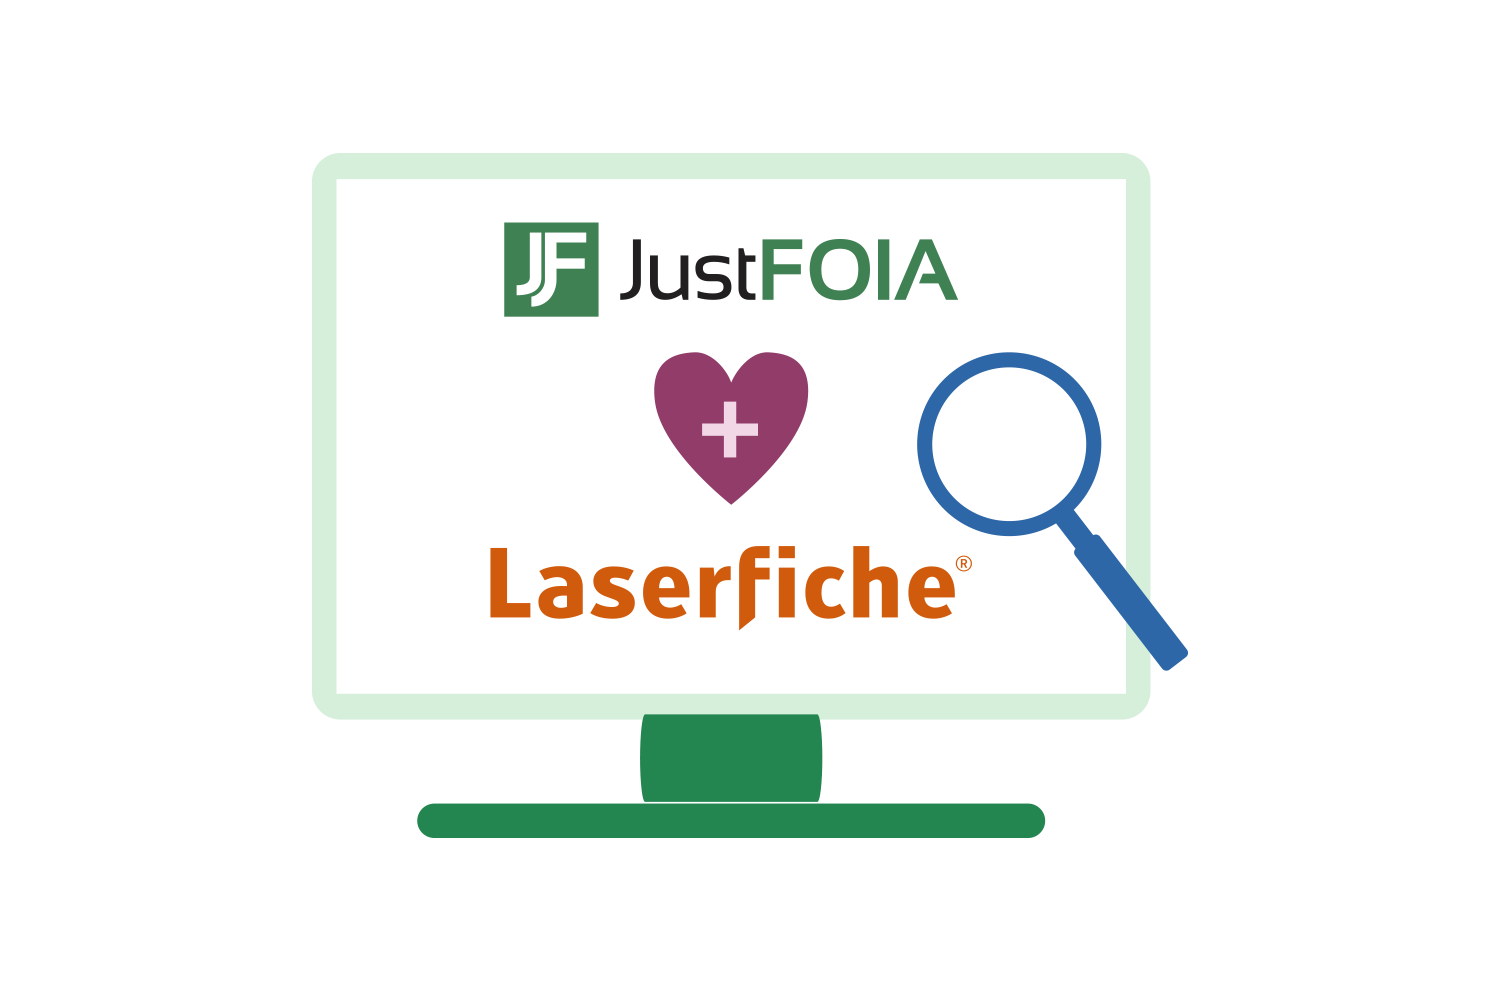 justfoia + laserfiche logos on a monitor